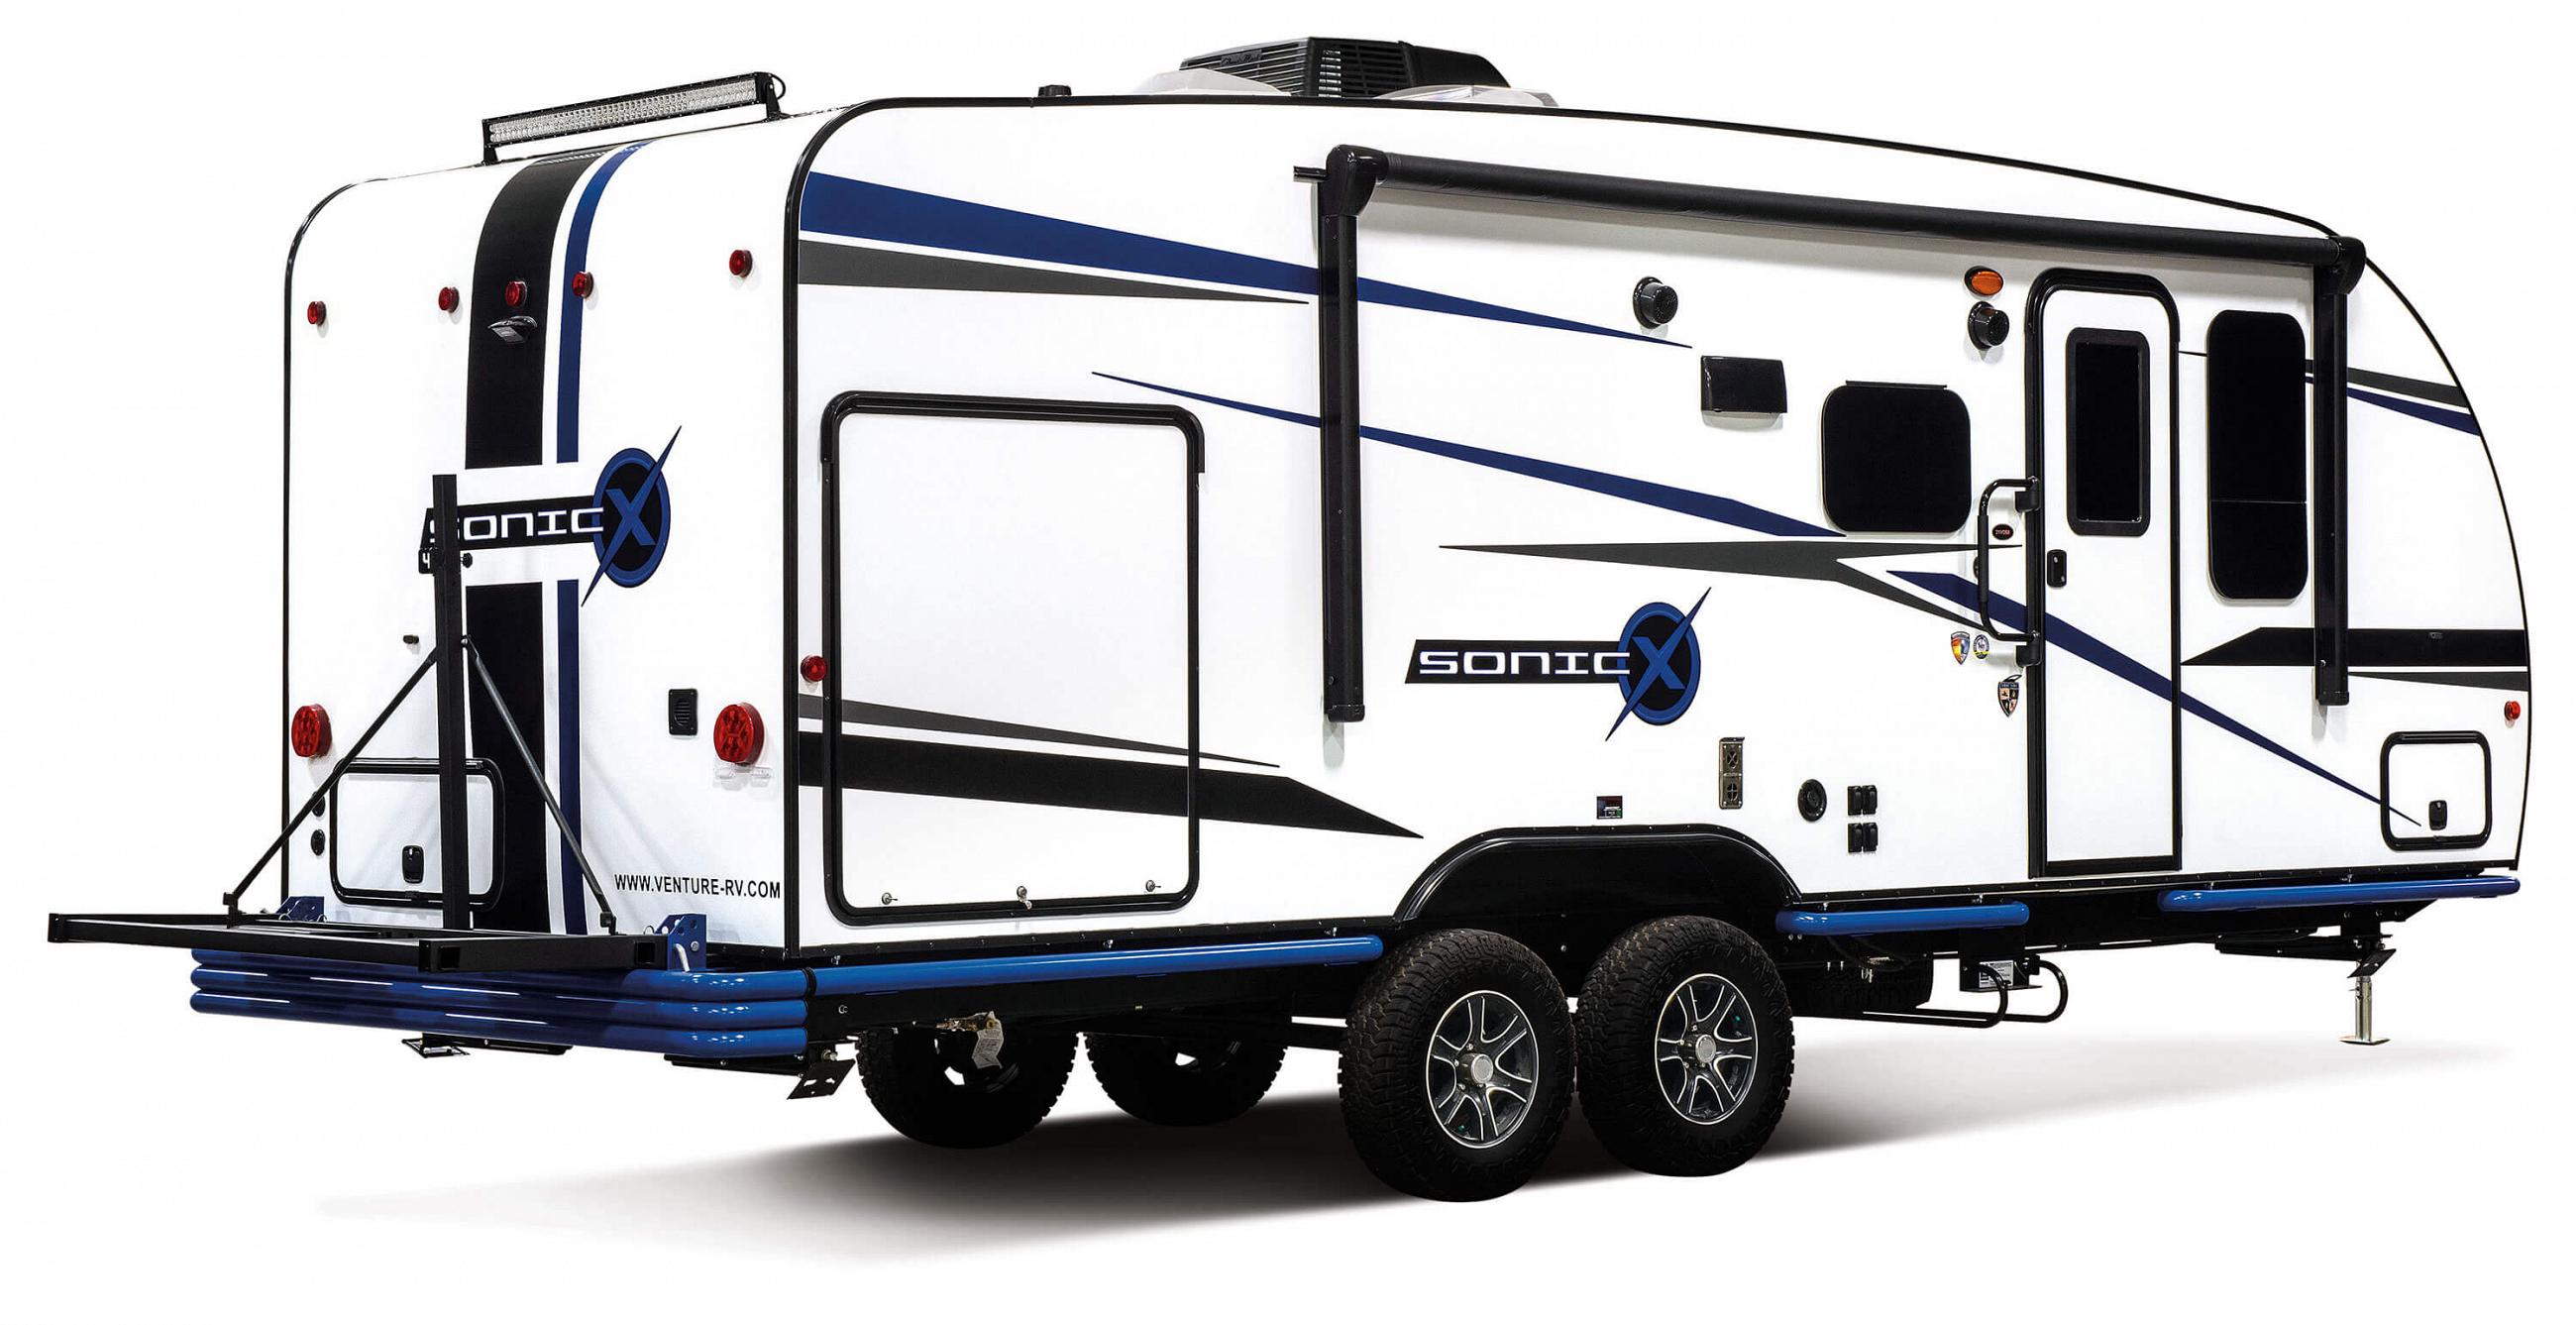 sonic x travel trailer for sale